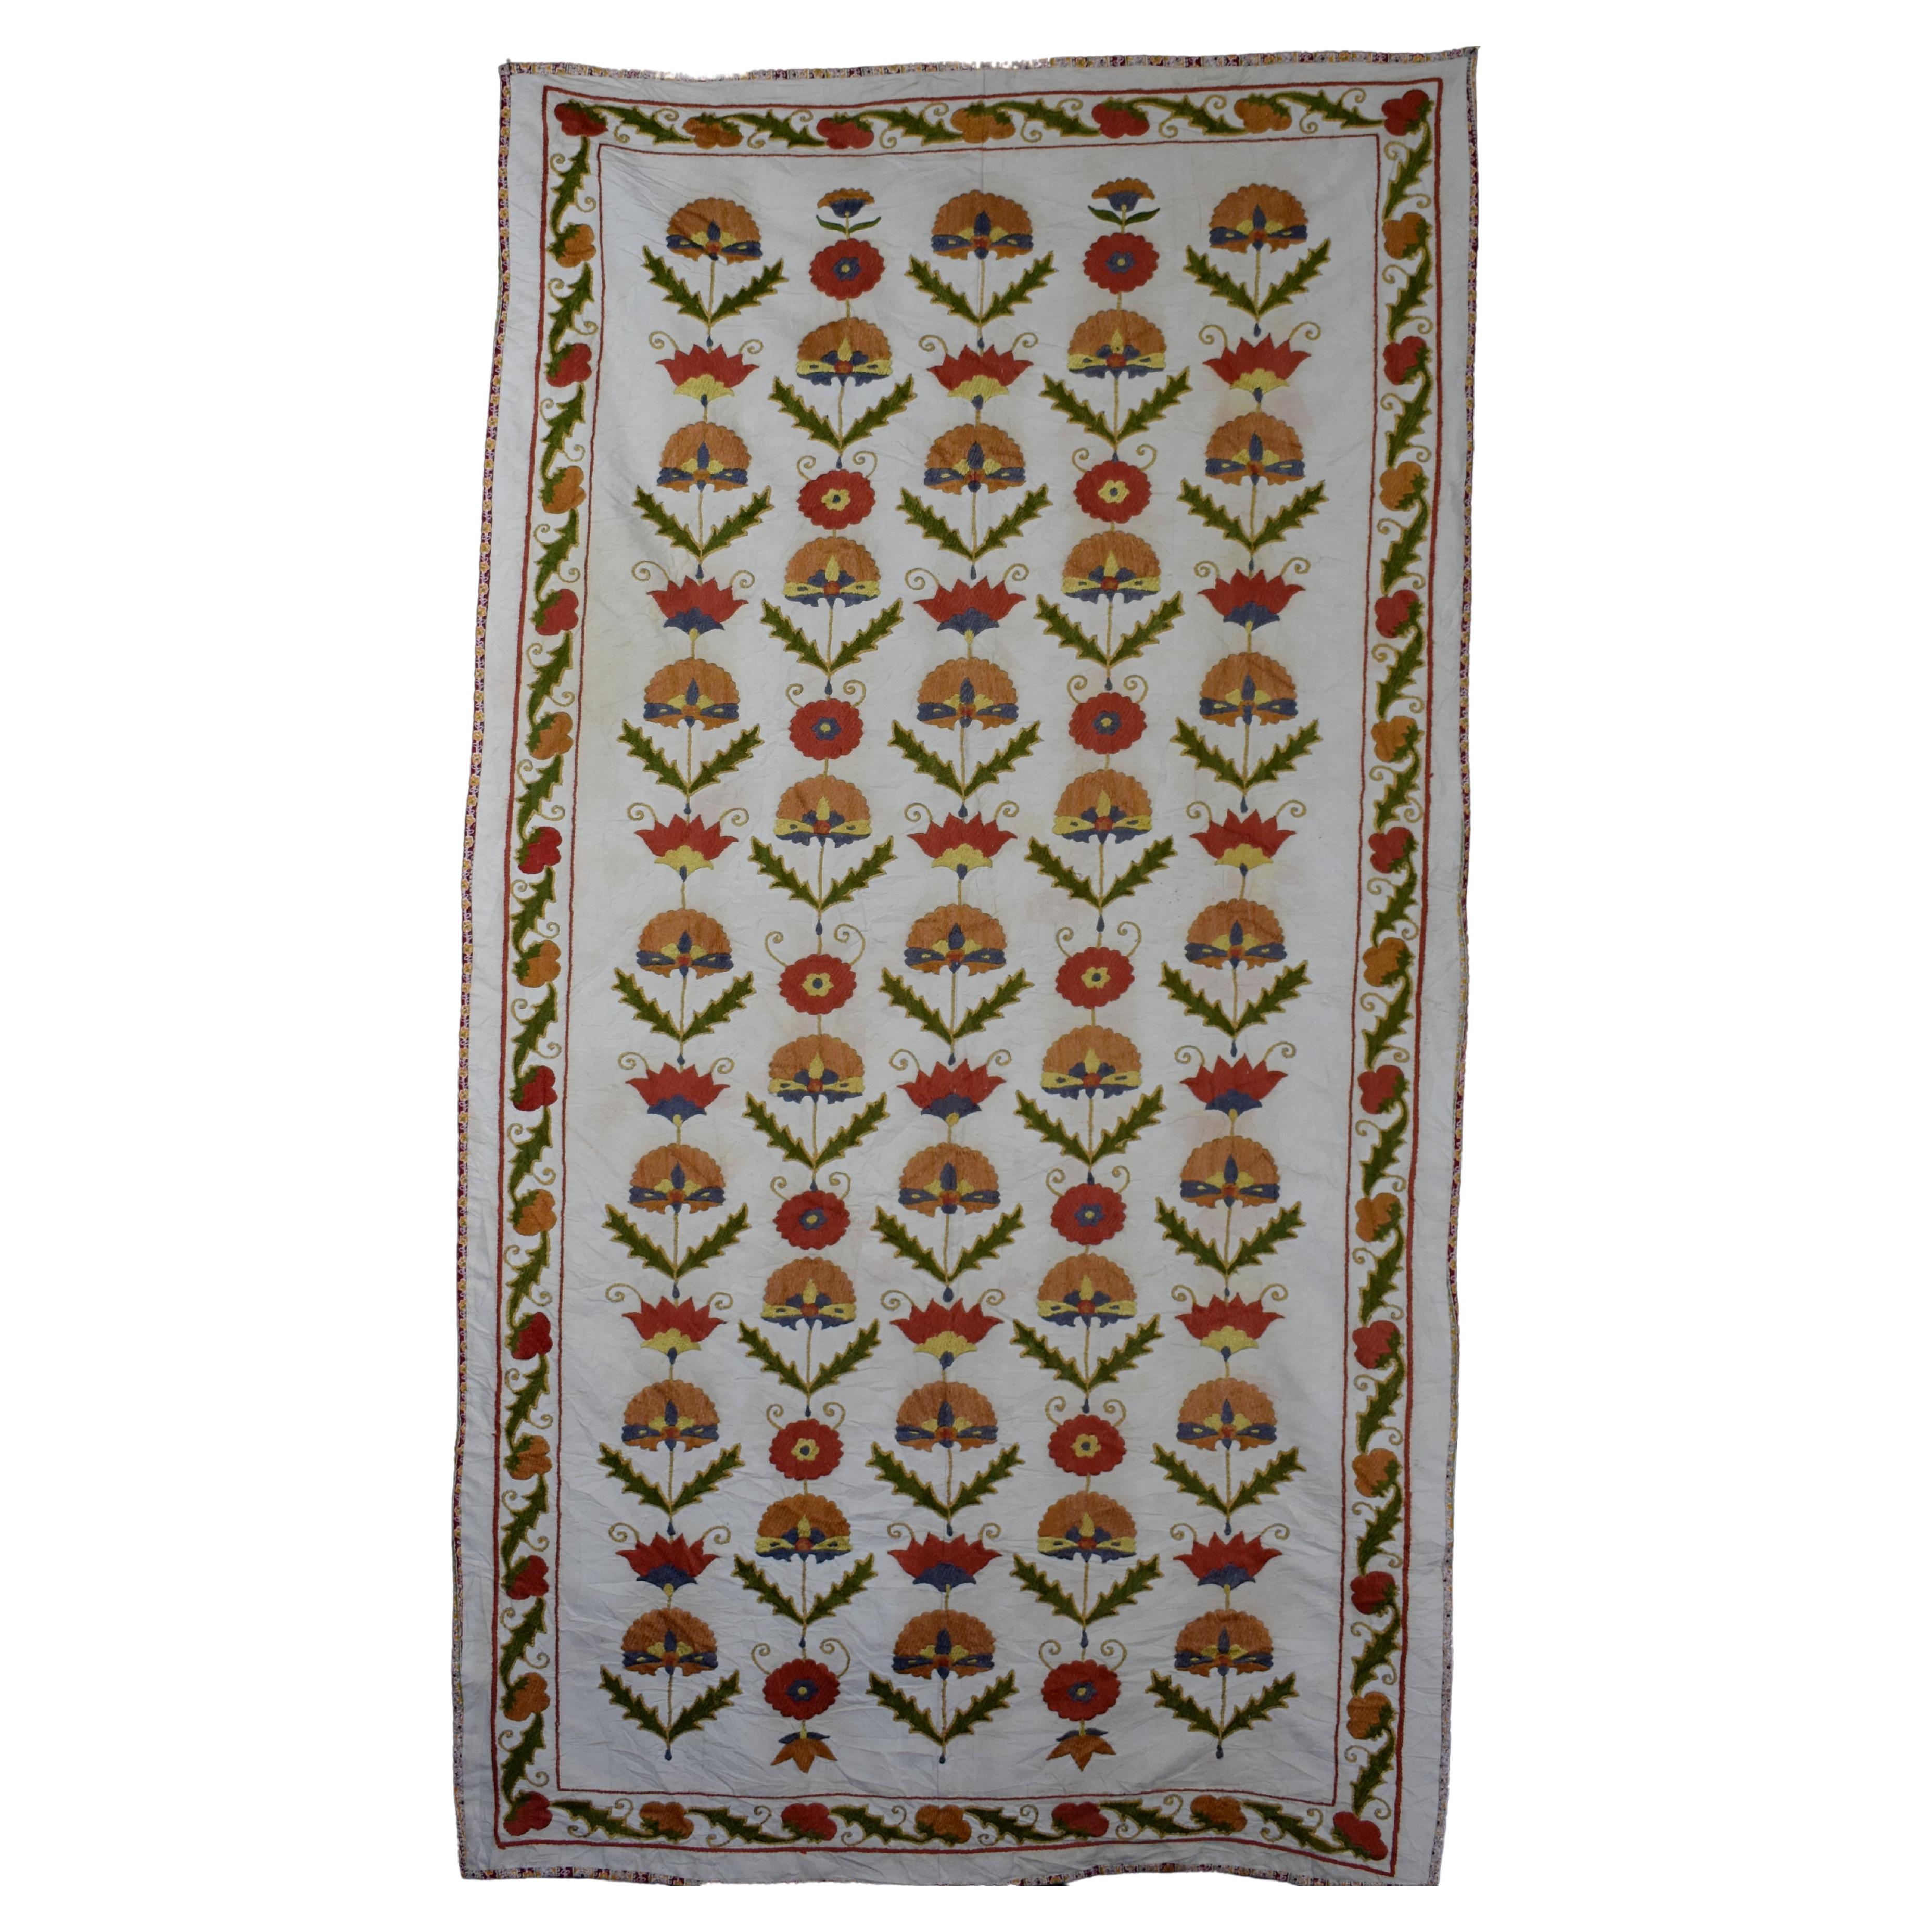 Central Asian Embroidered Hanging For Sale